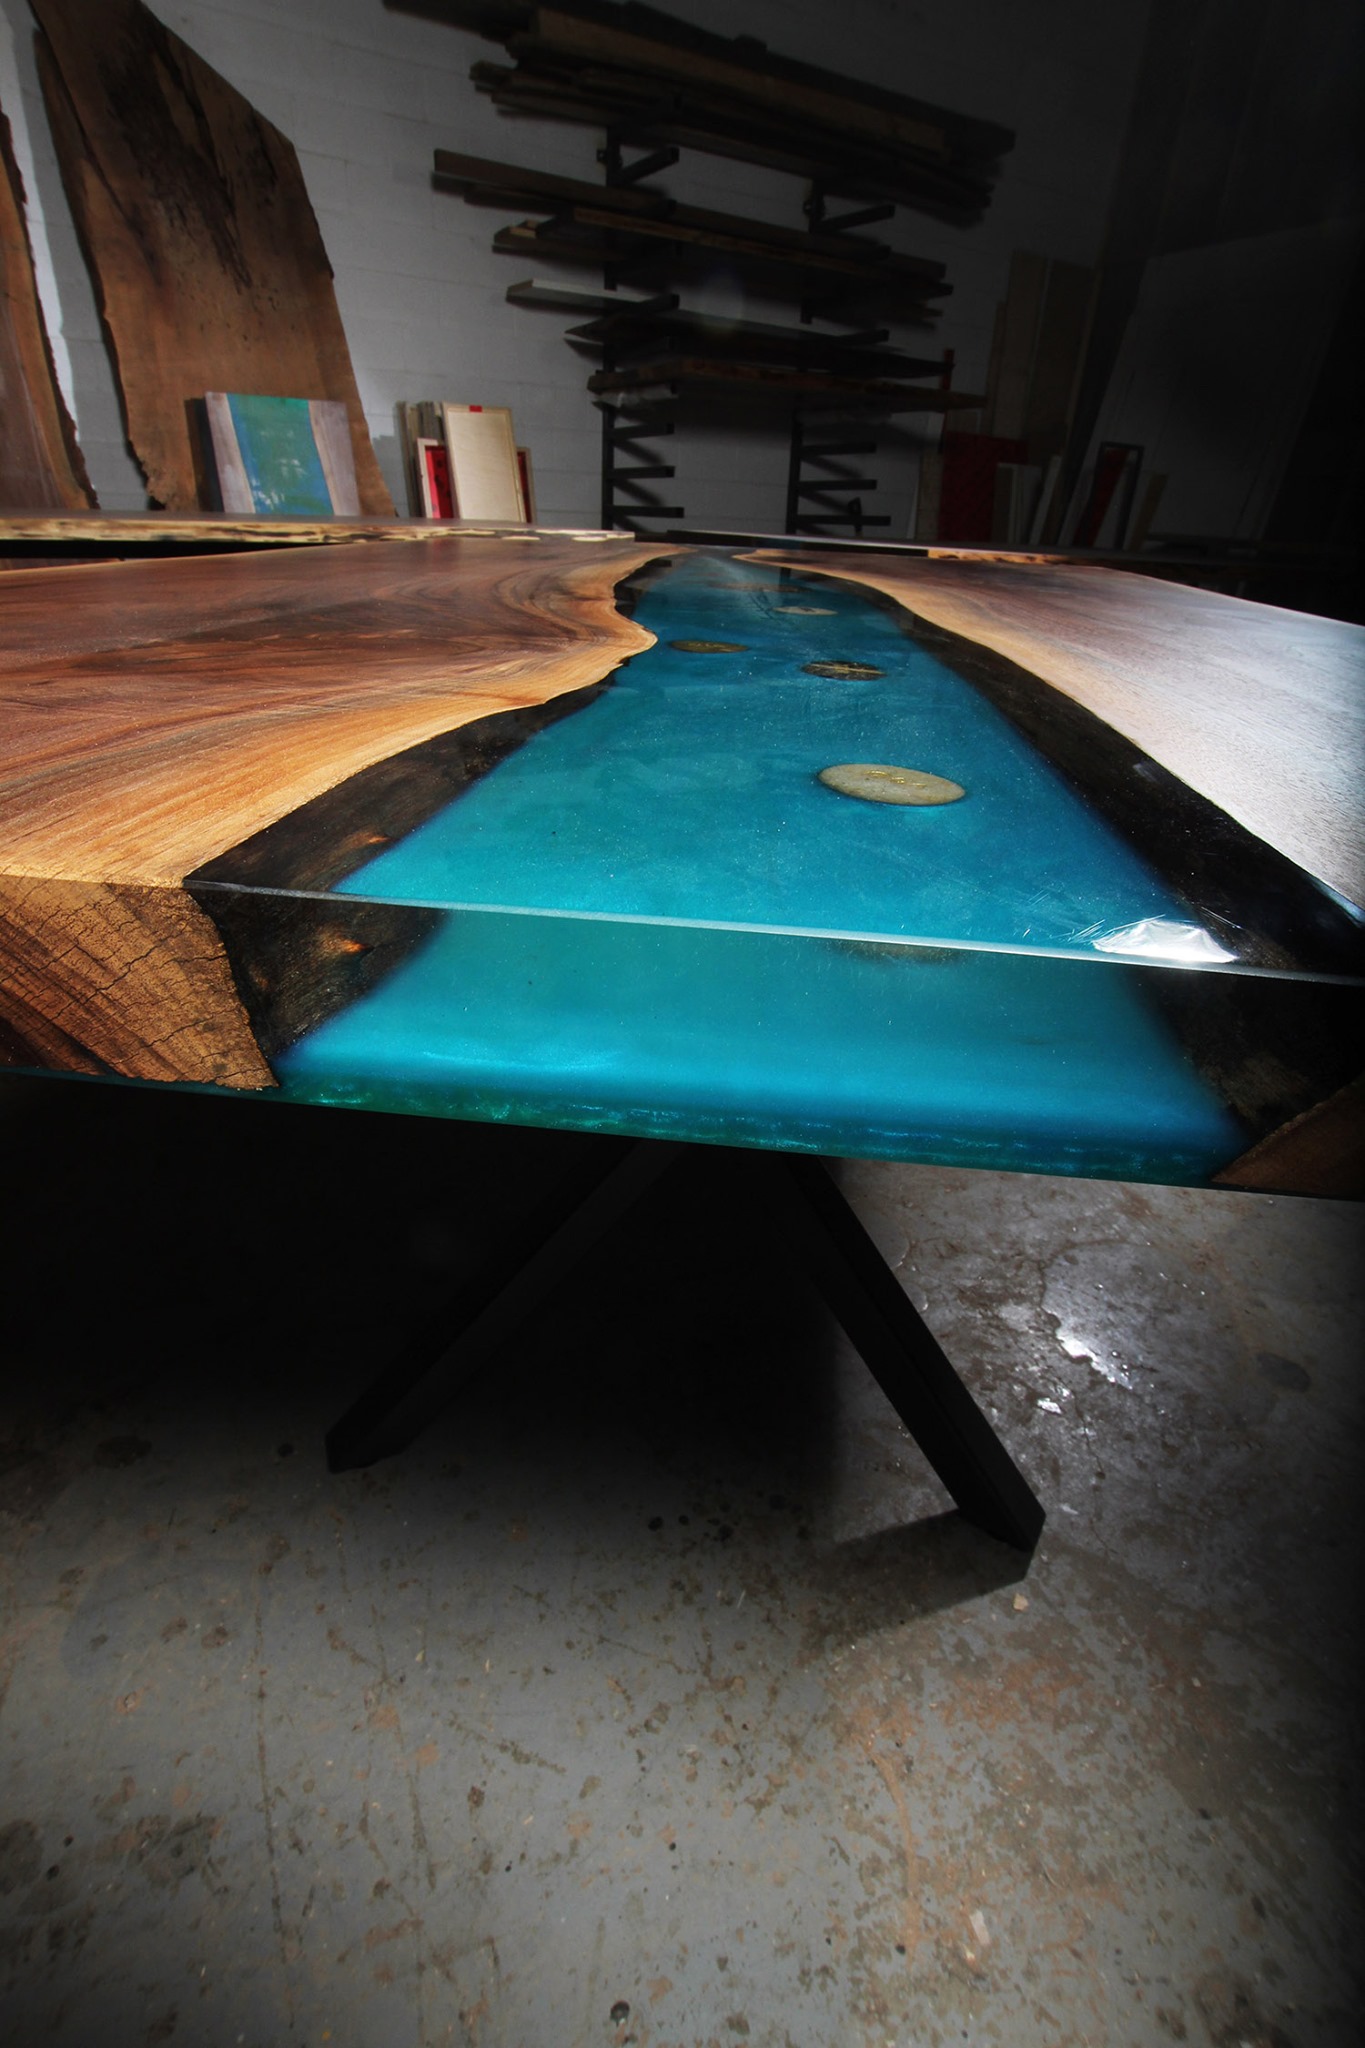 Live Edge Walnut River Dining Table with K shaped legs